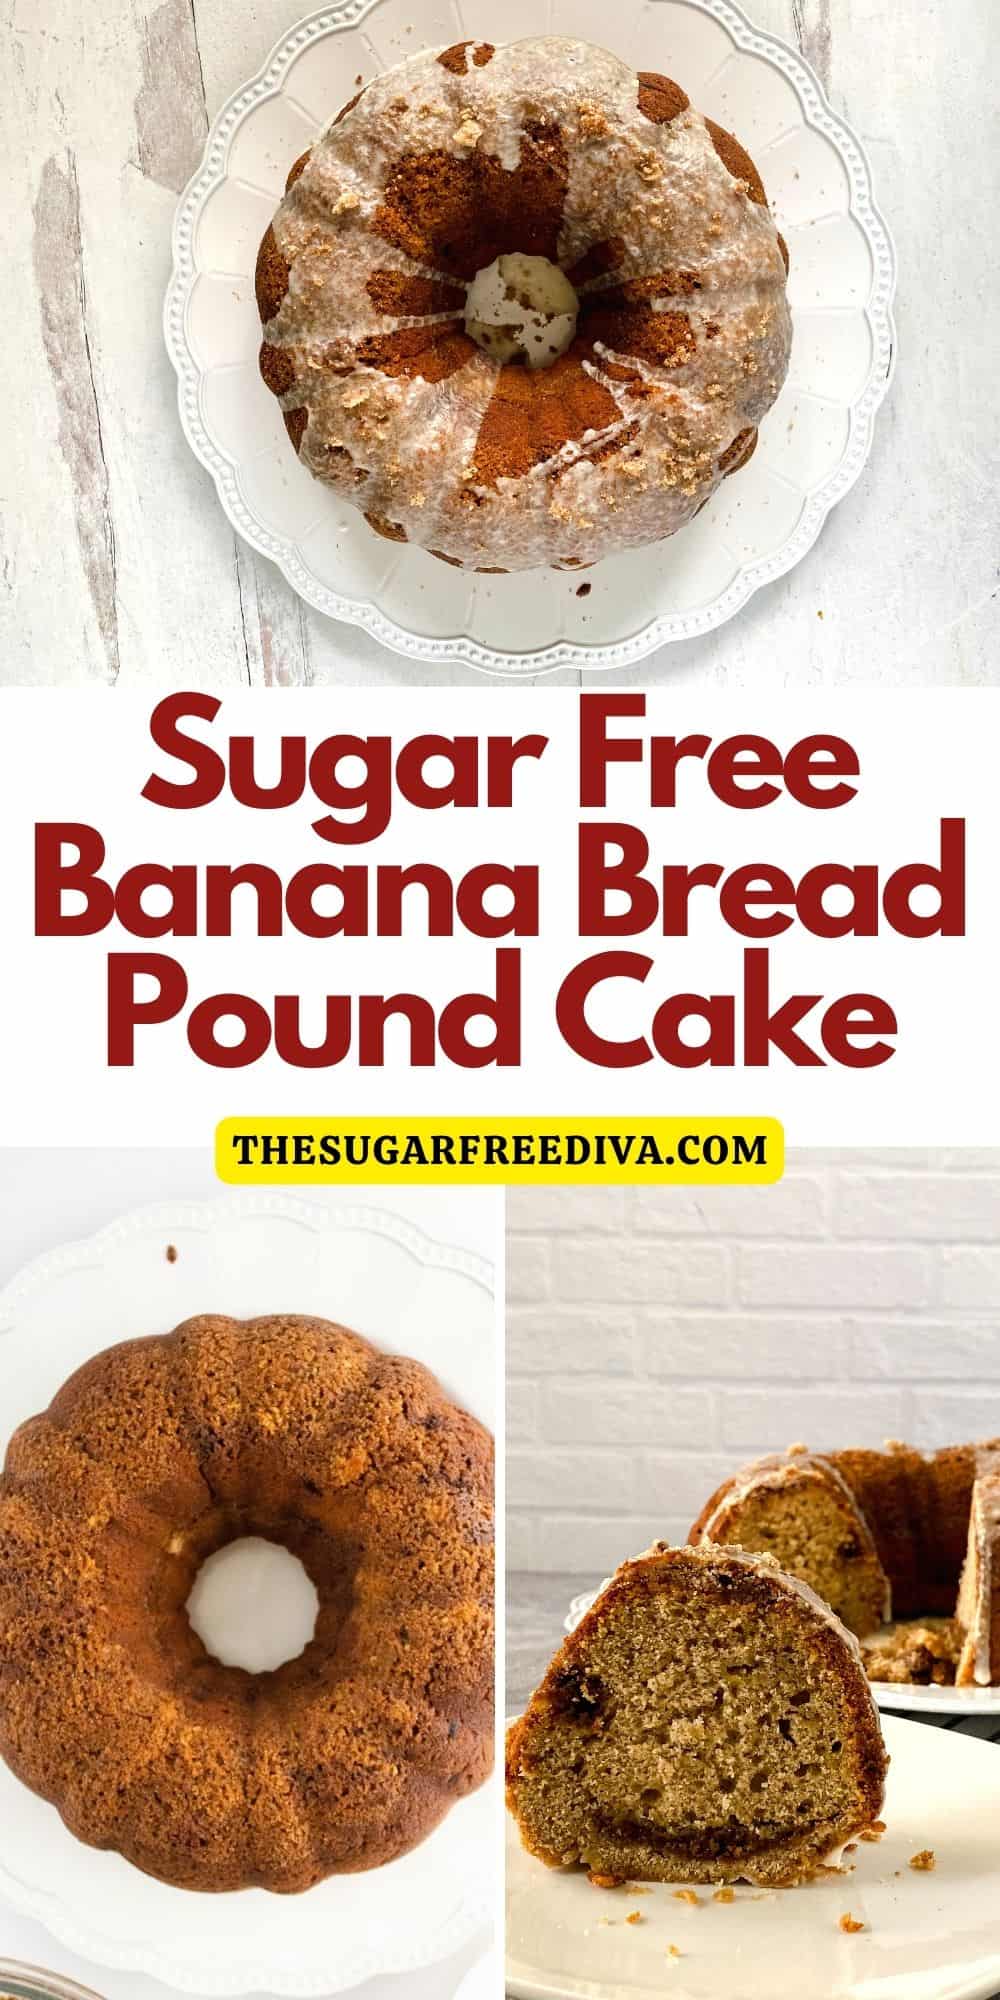 Sugar Free Banana Bread Pound Cake,  a delicious moist dessert recipe made with no added sugar and then topped with a sugar free glaze.